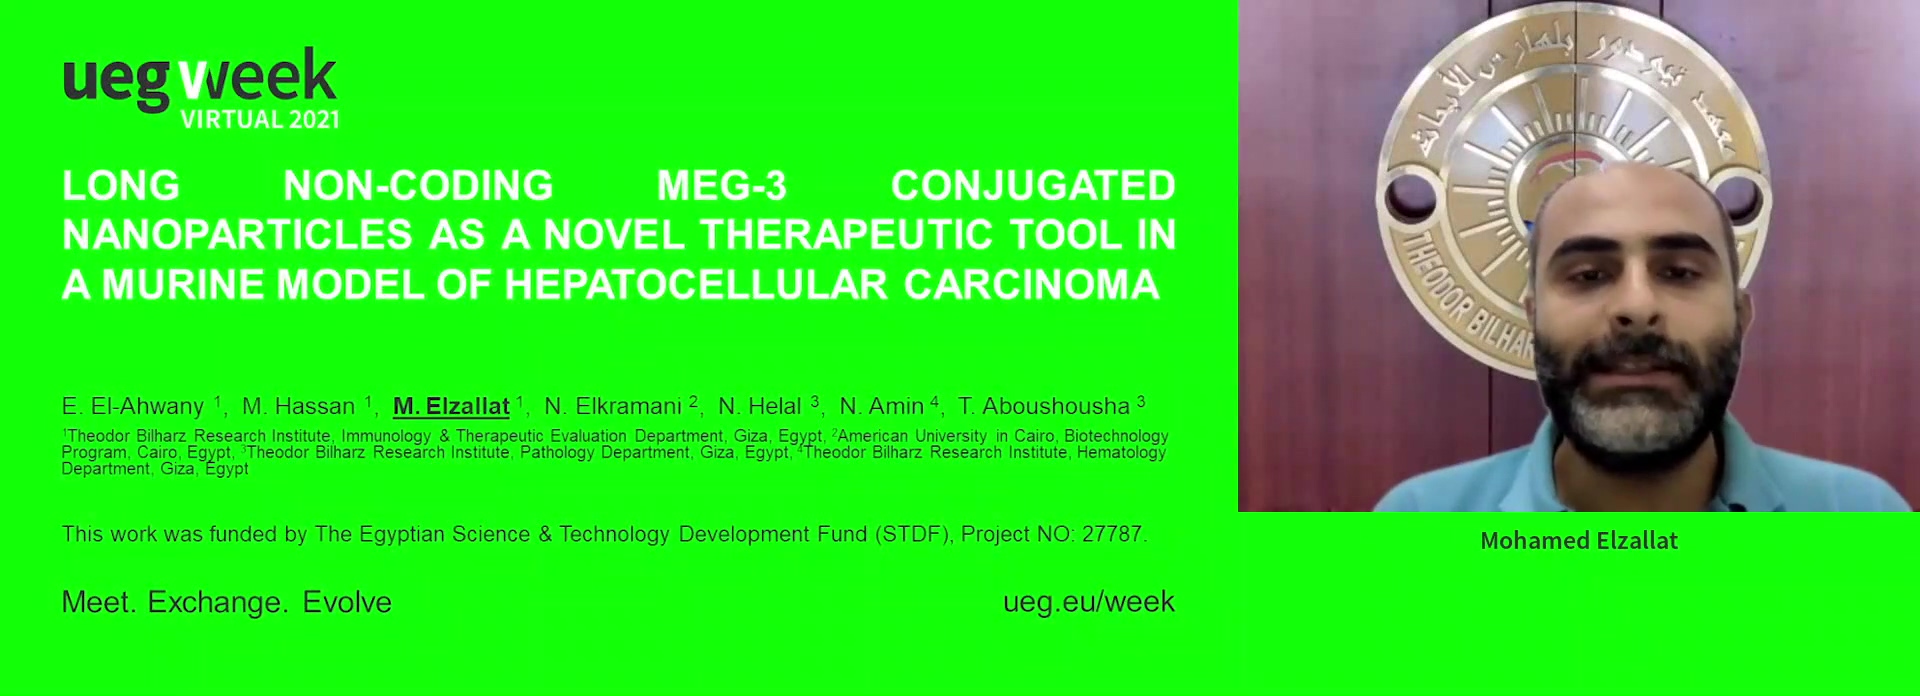 LONG NON-CODING MEG-3 CONJUGATED NANOPARTICLES AS A NOVEL THERAPEUTIC TOOL IN A MURINE MODEL OF HEPATOCELLULAR CARCINOMA